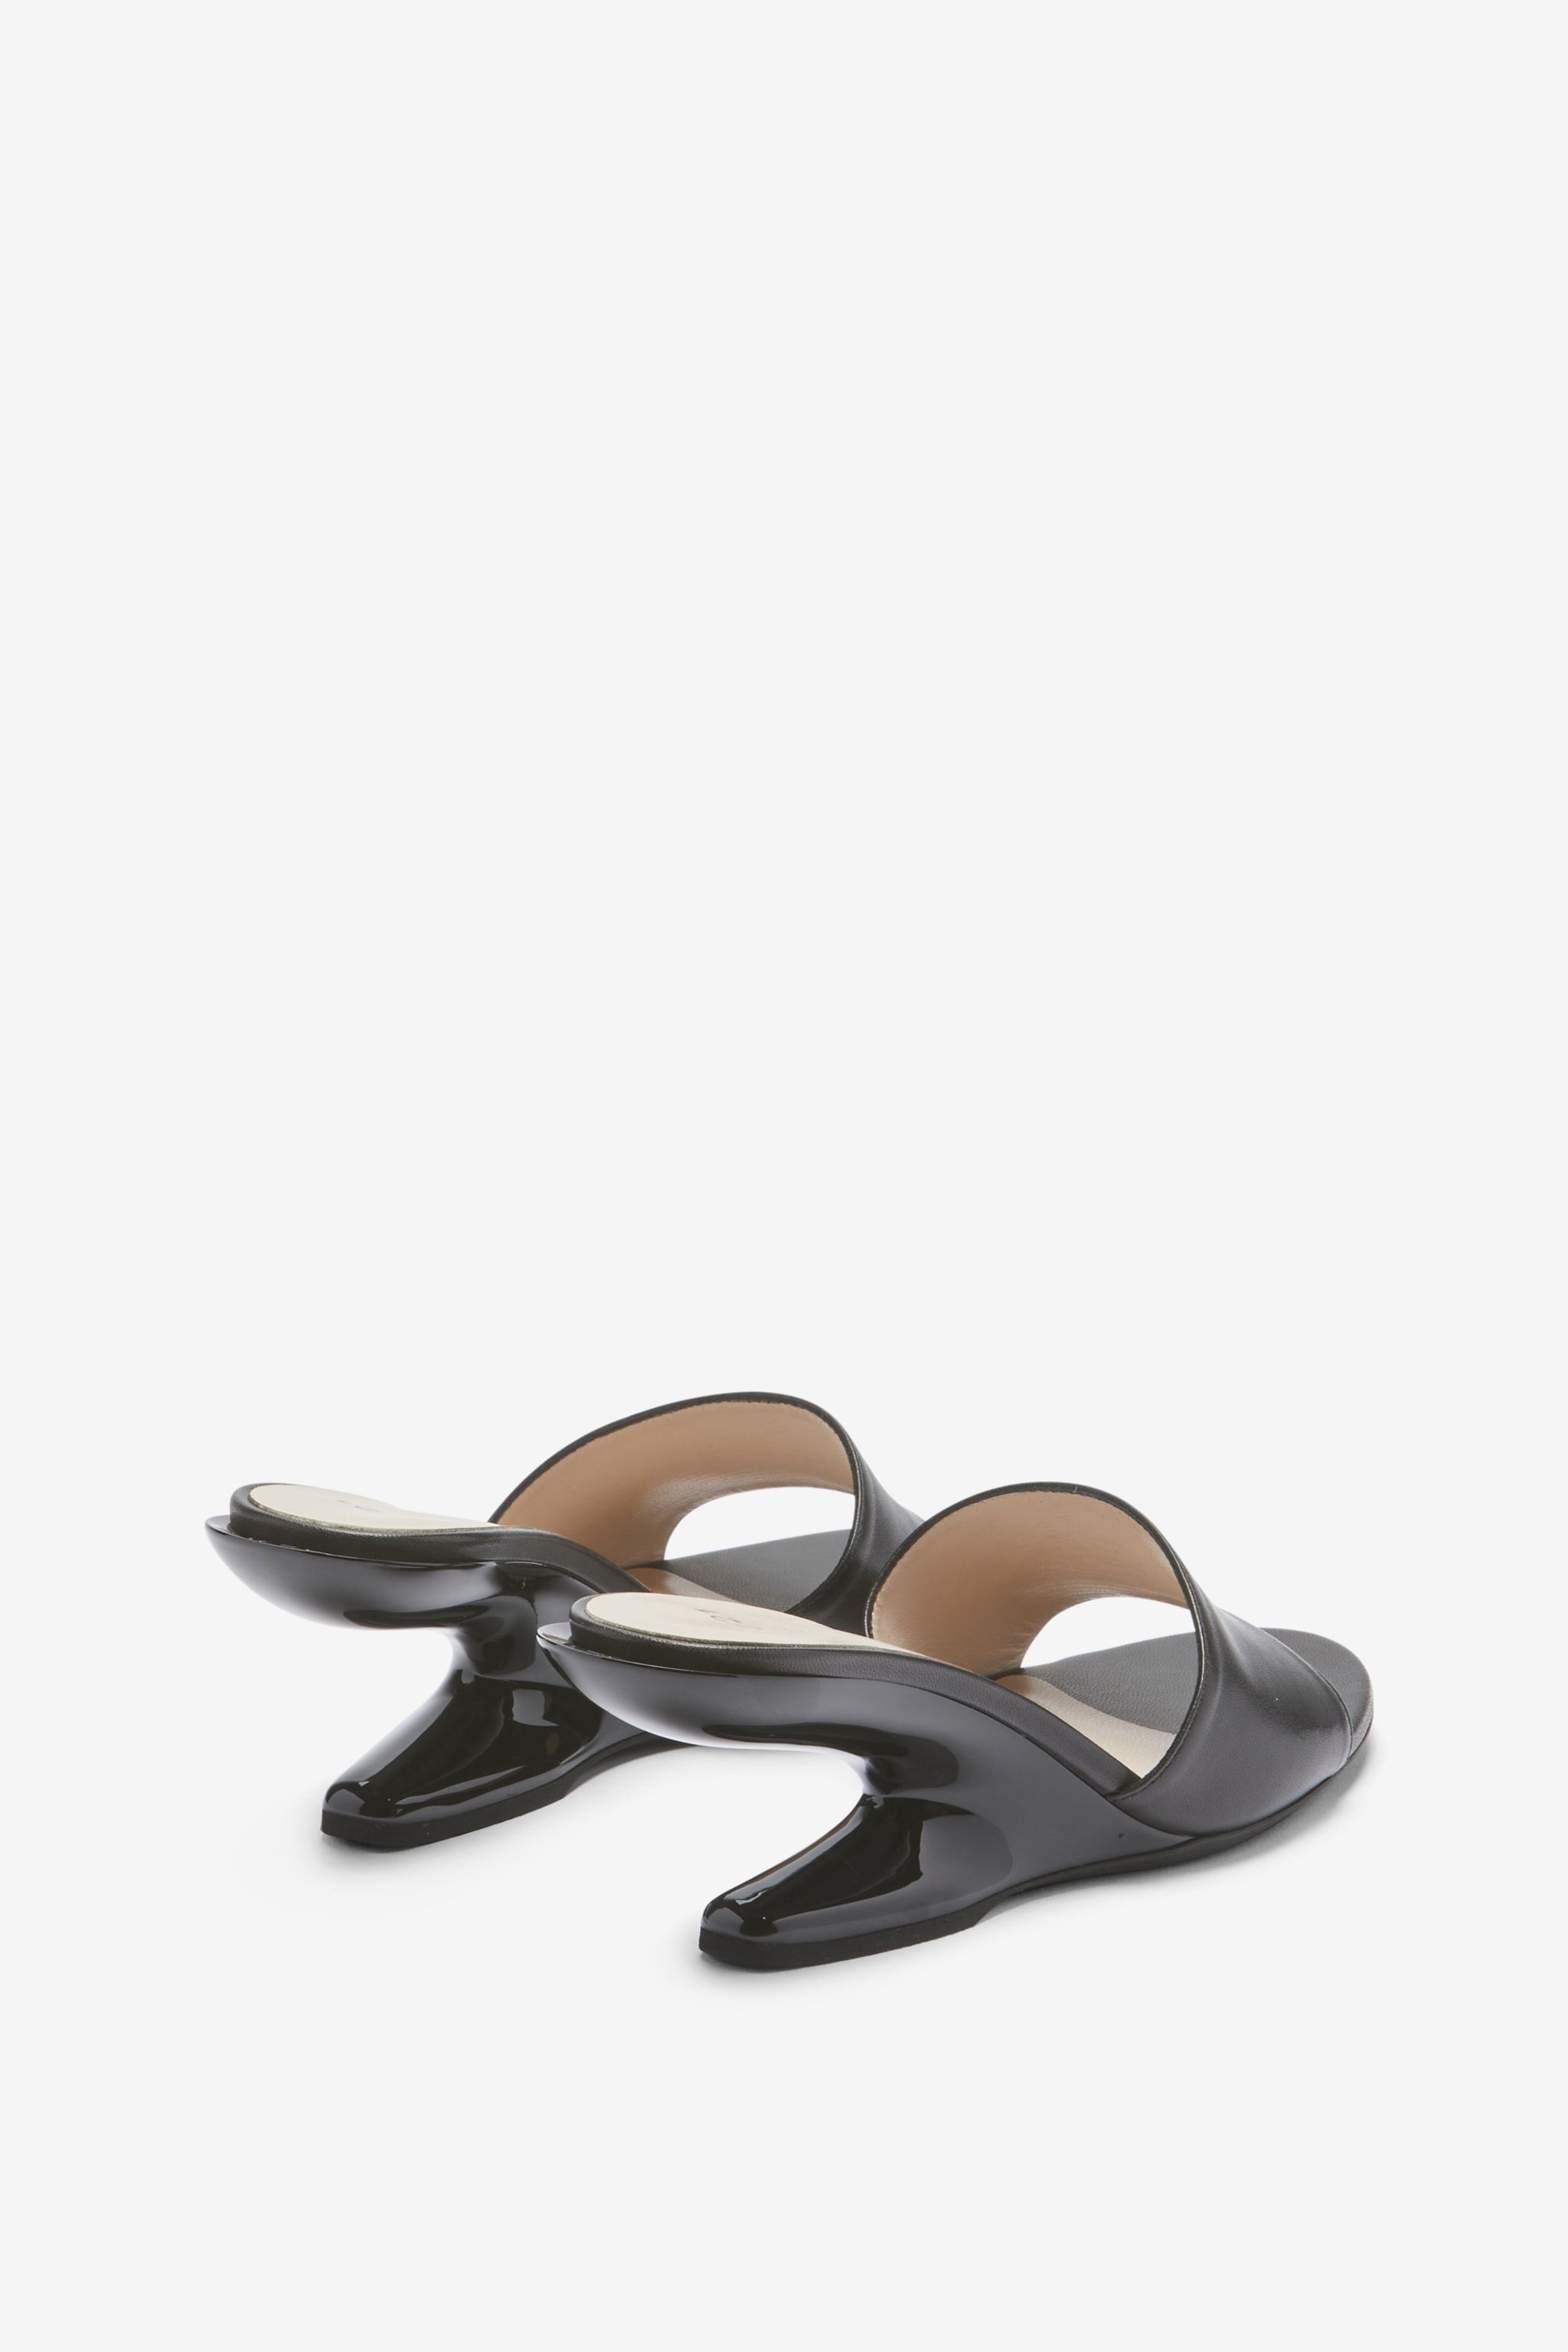 LEATHER MULES - 3